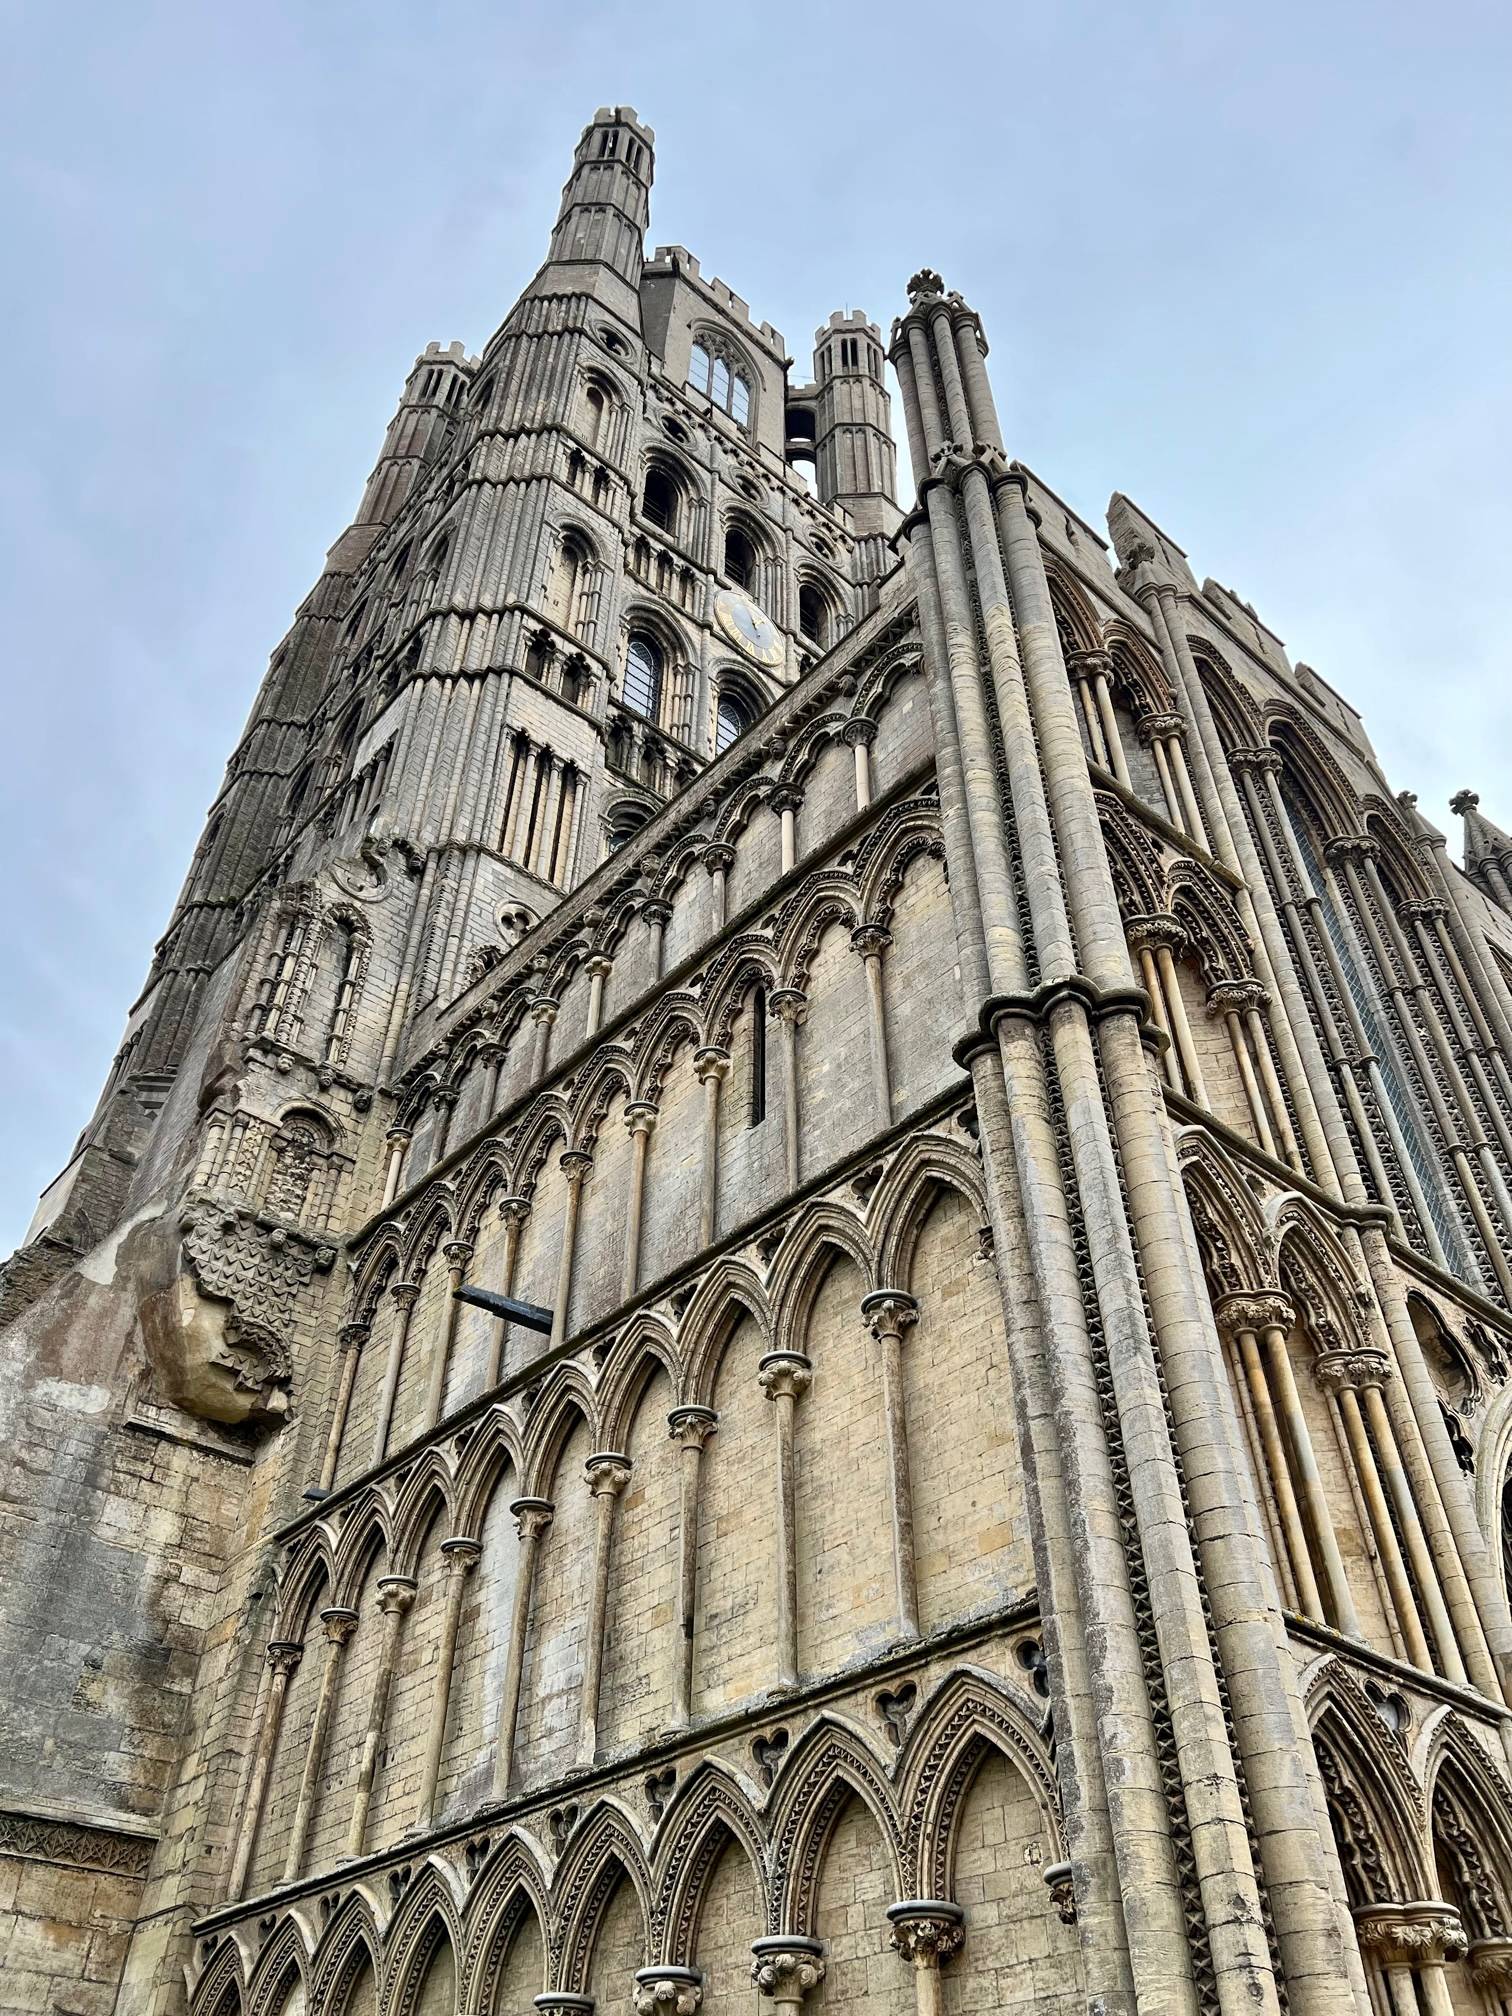 Exterior upshot of medieval cathedral